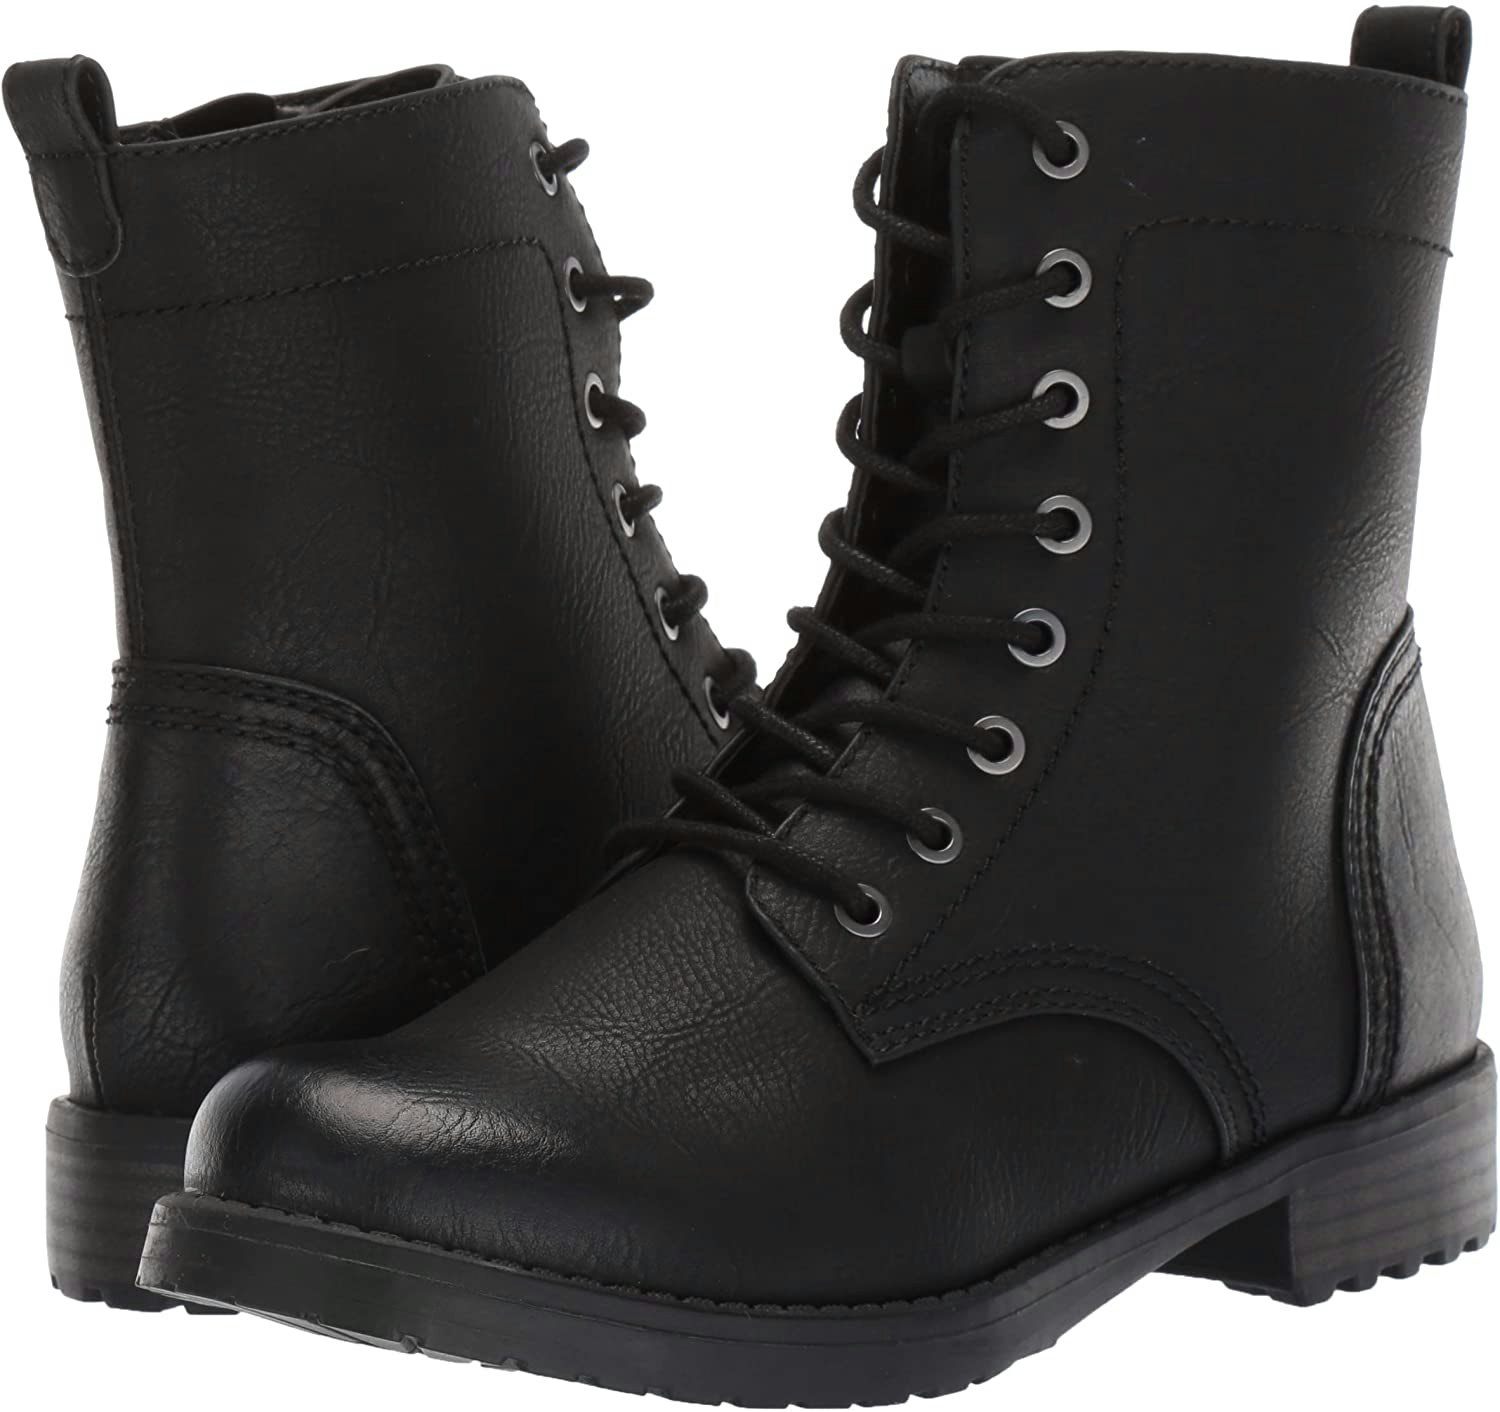 Streamlined Combat Boots for Enhanced Ankle Support